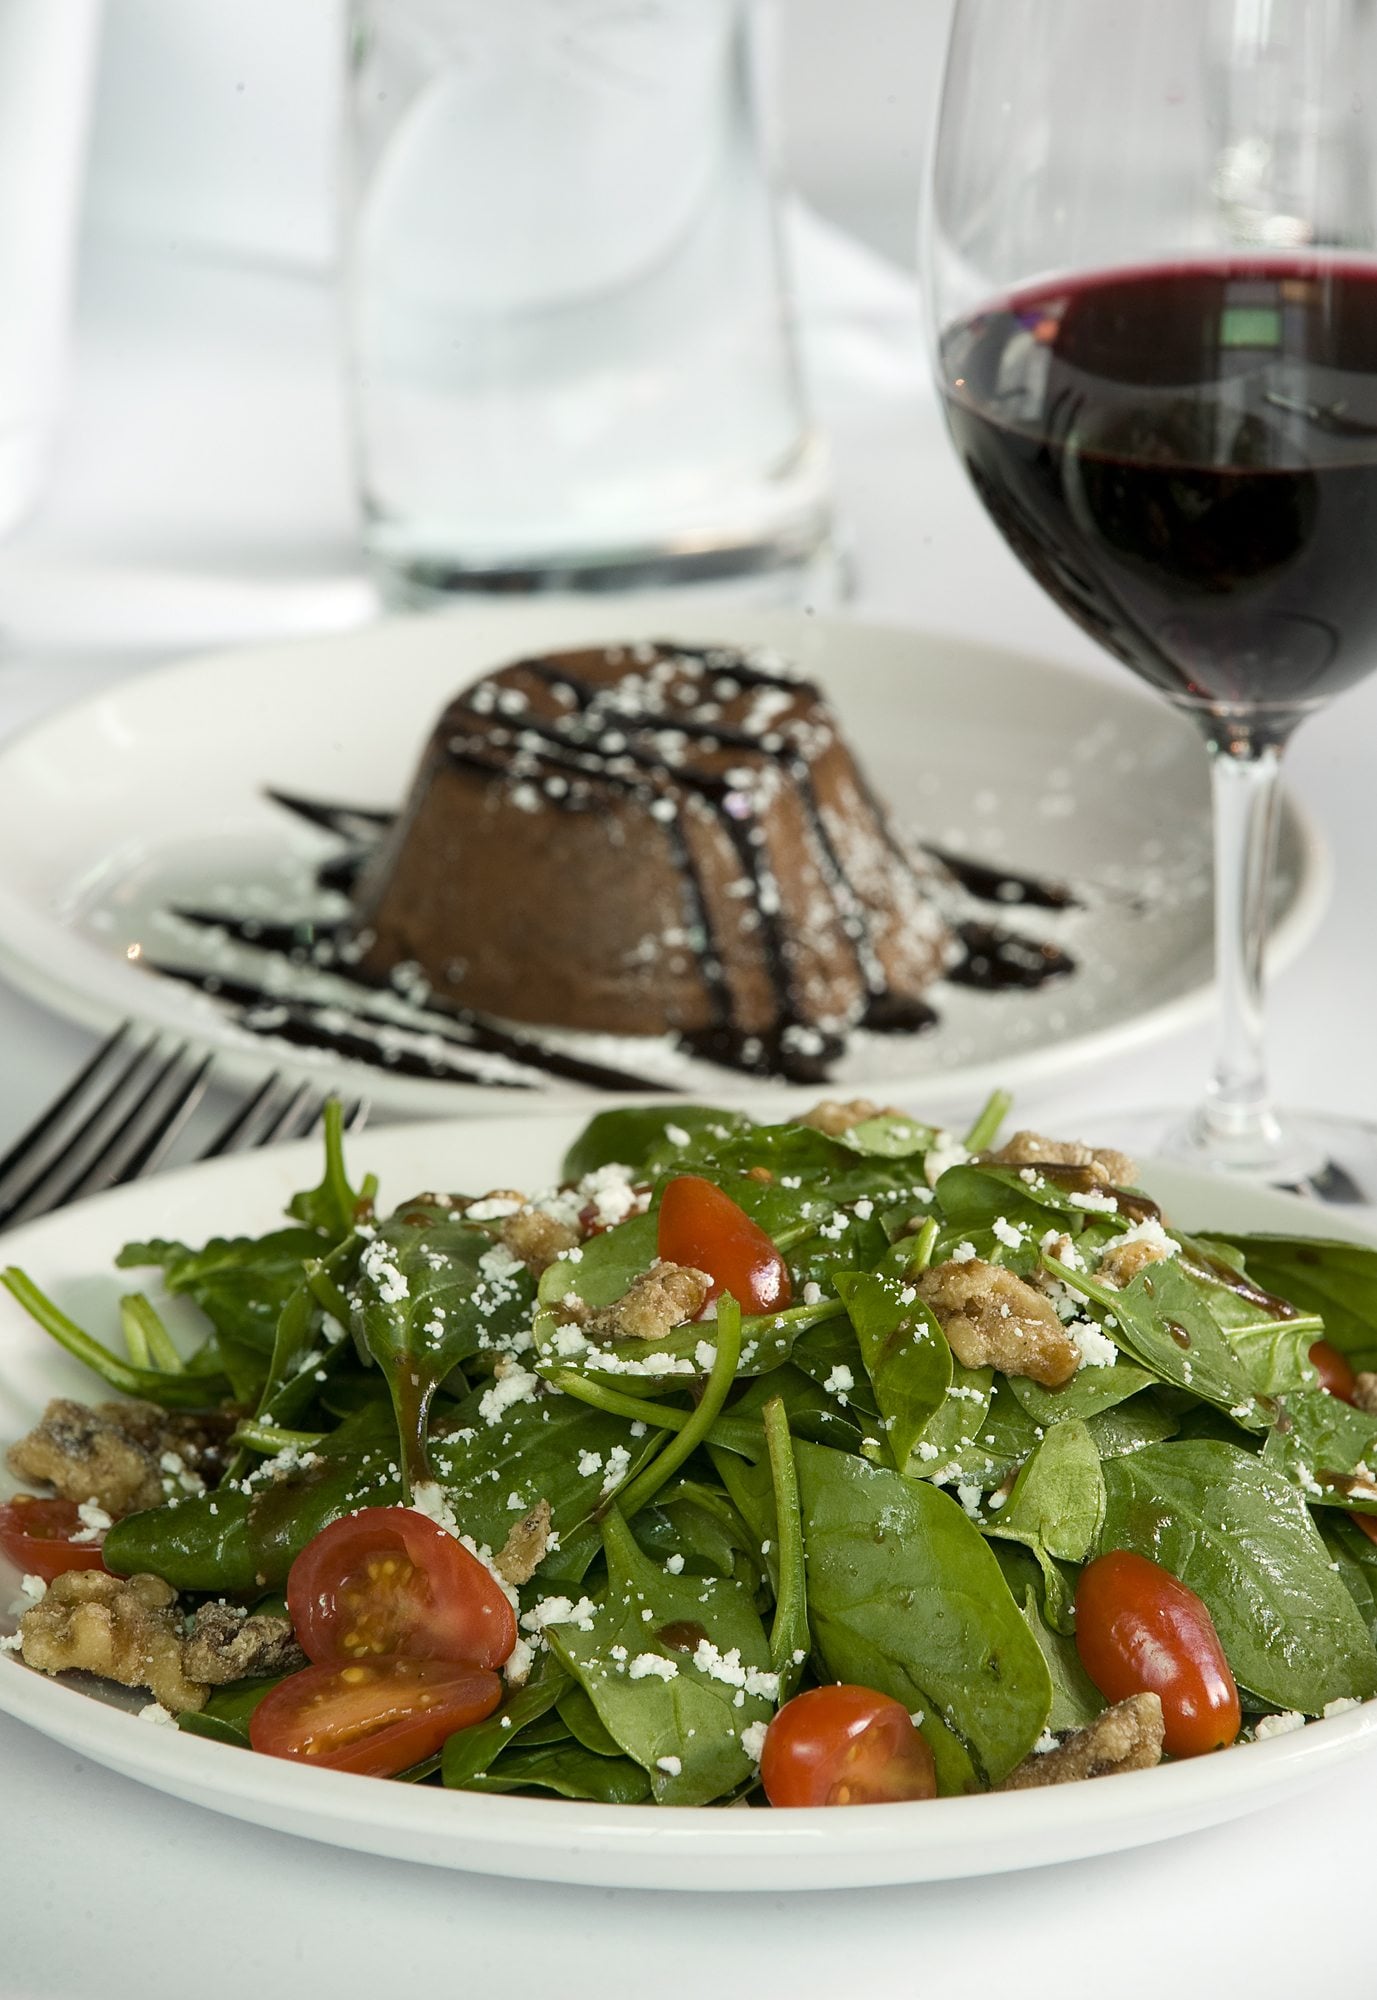 Spinach Salad with candied walnuts and goat cheese and Chocolate Lava cake are among the offerings in the living room theaters at Cinetopia.